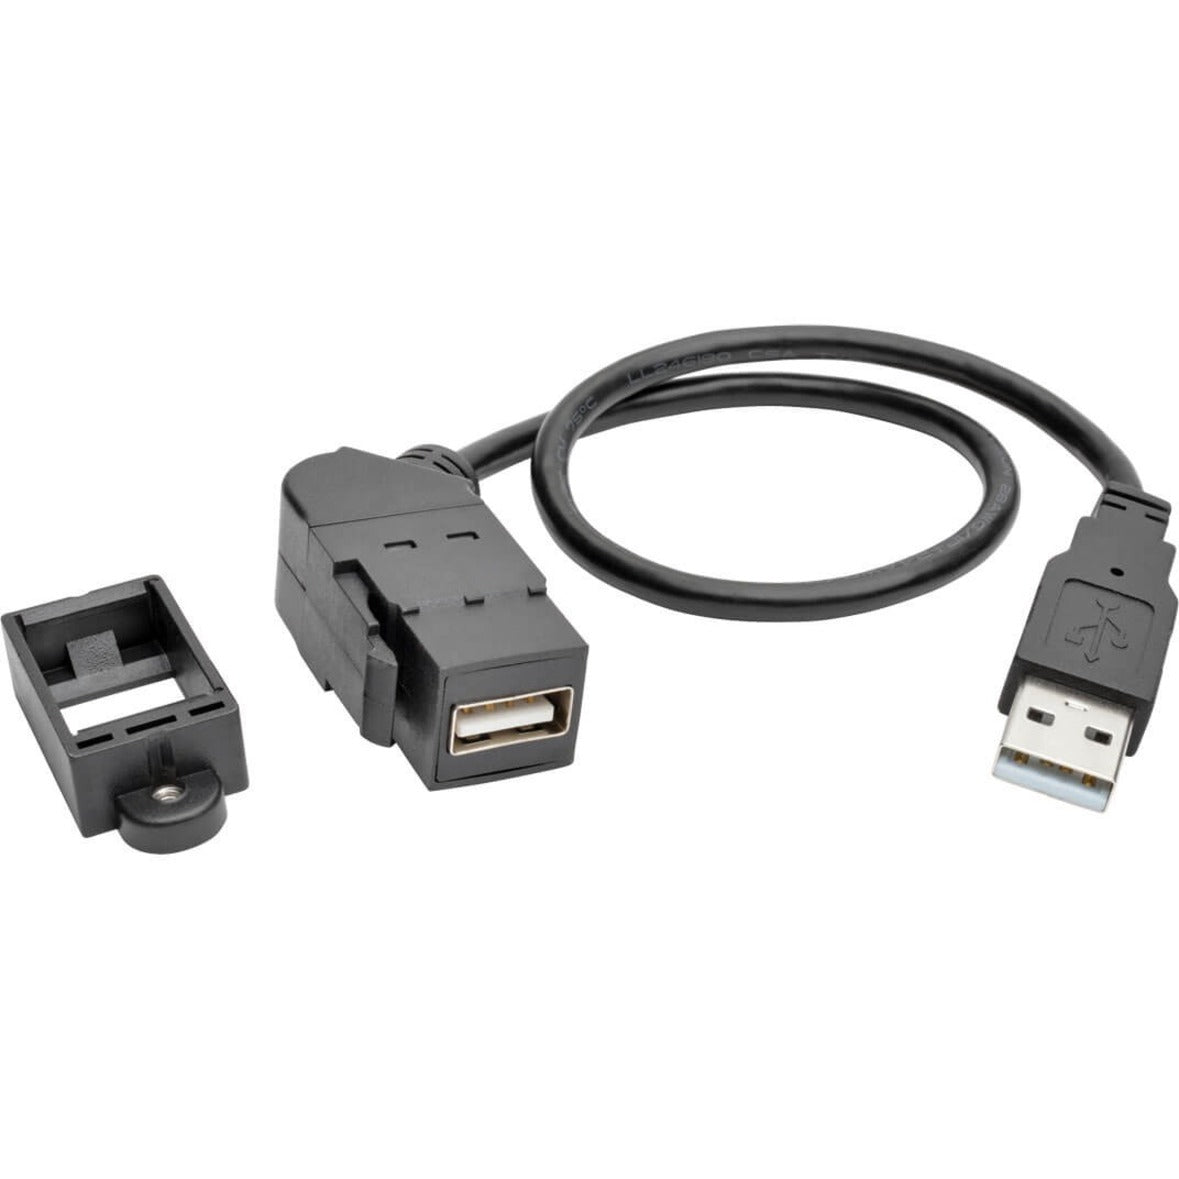 Tripp Lite U024-001-KPA-BK USB Extension Data Transfer Cable, 1 ft, Angled Connector, Shielded, Black